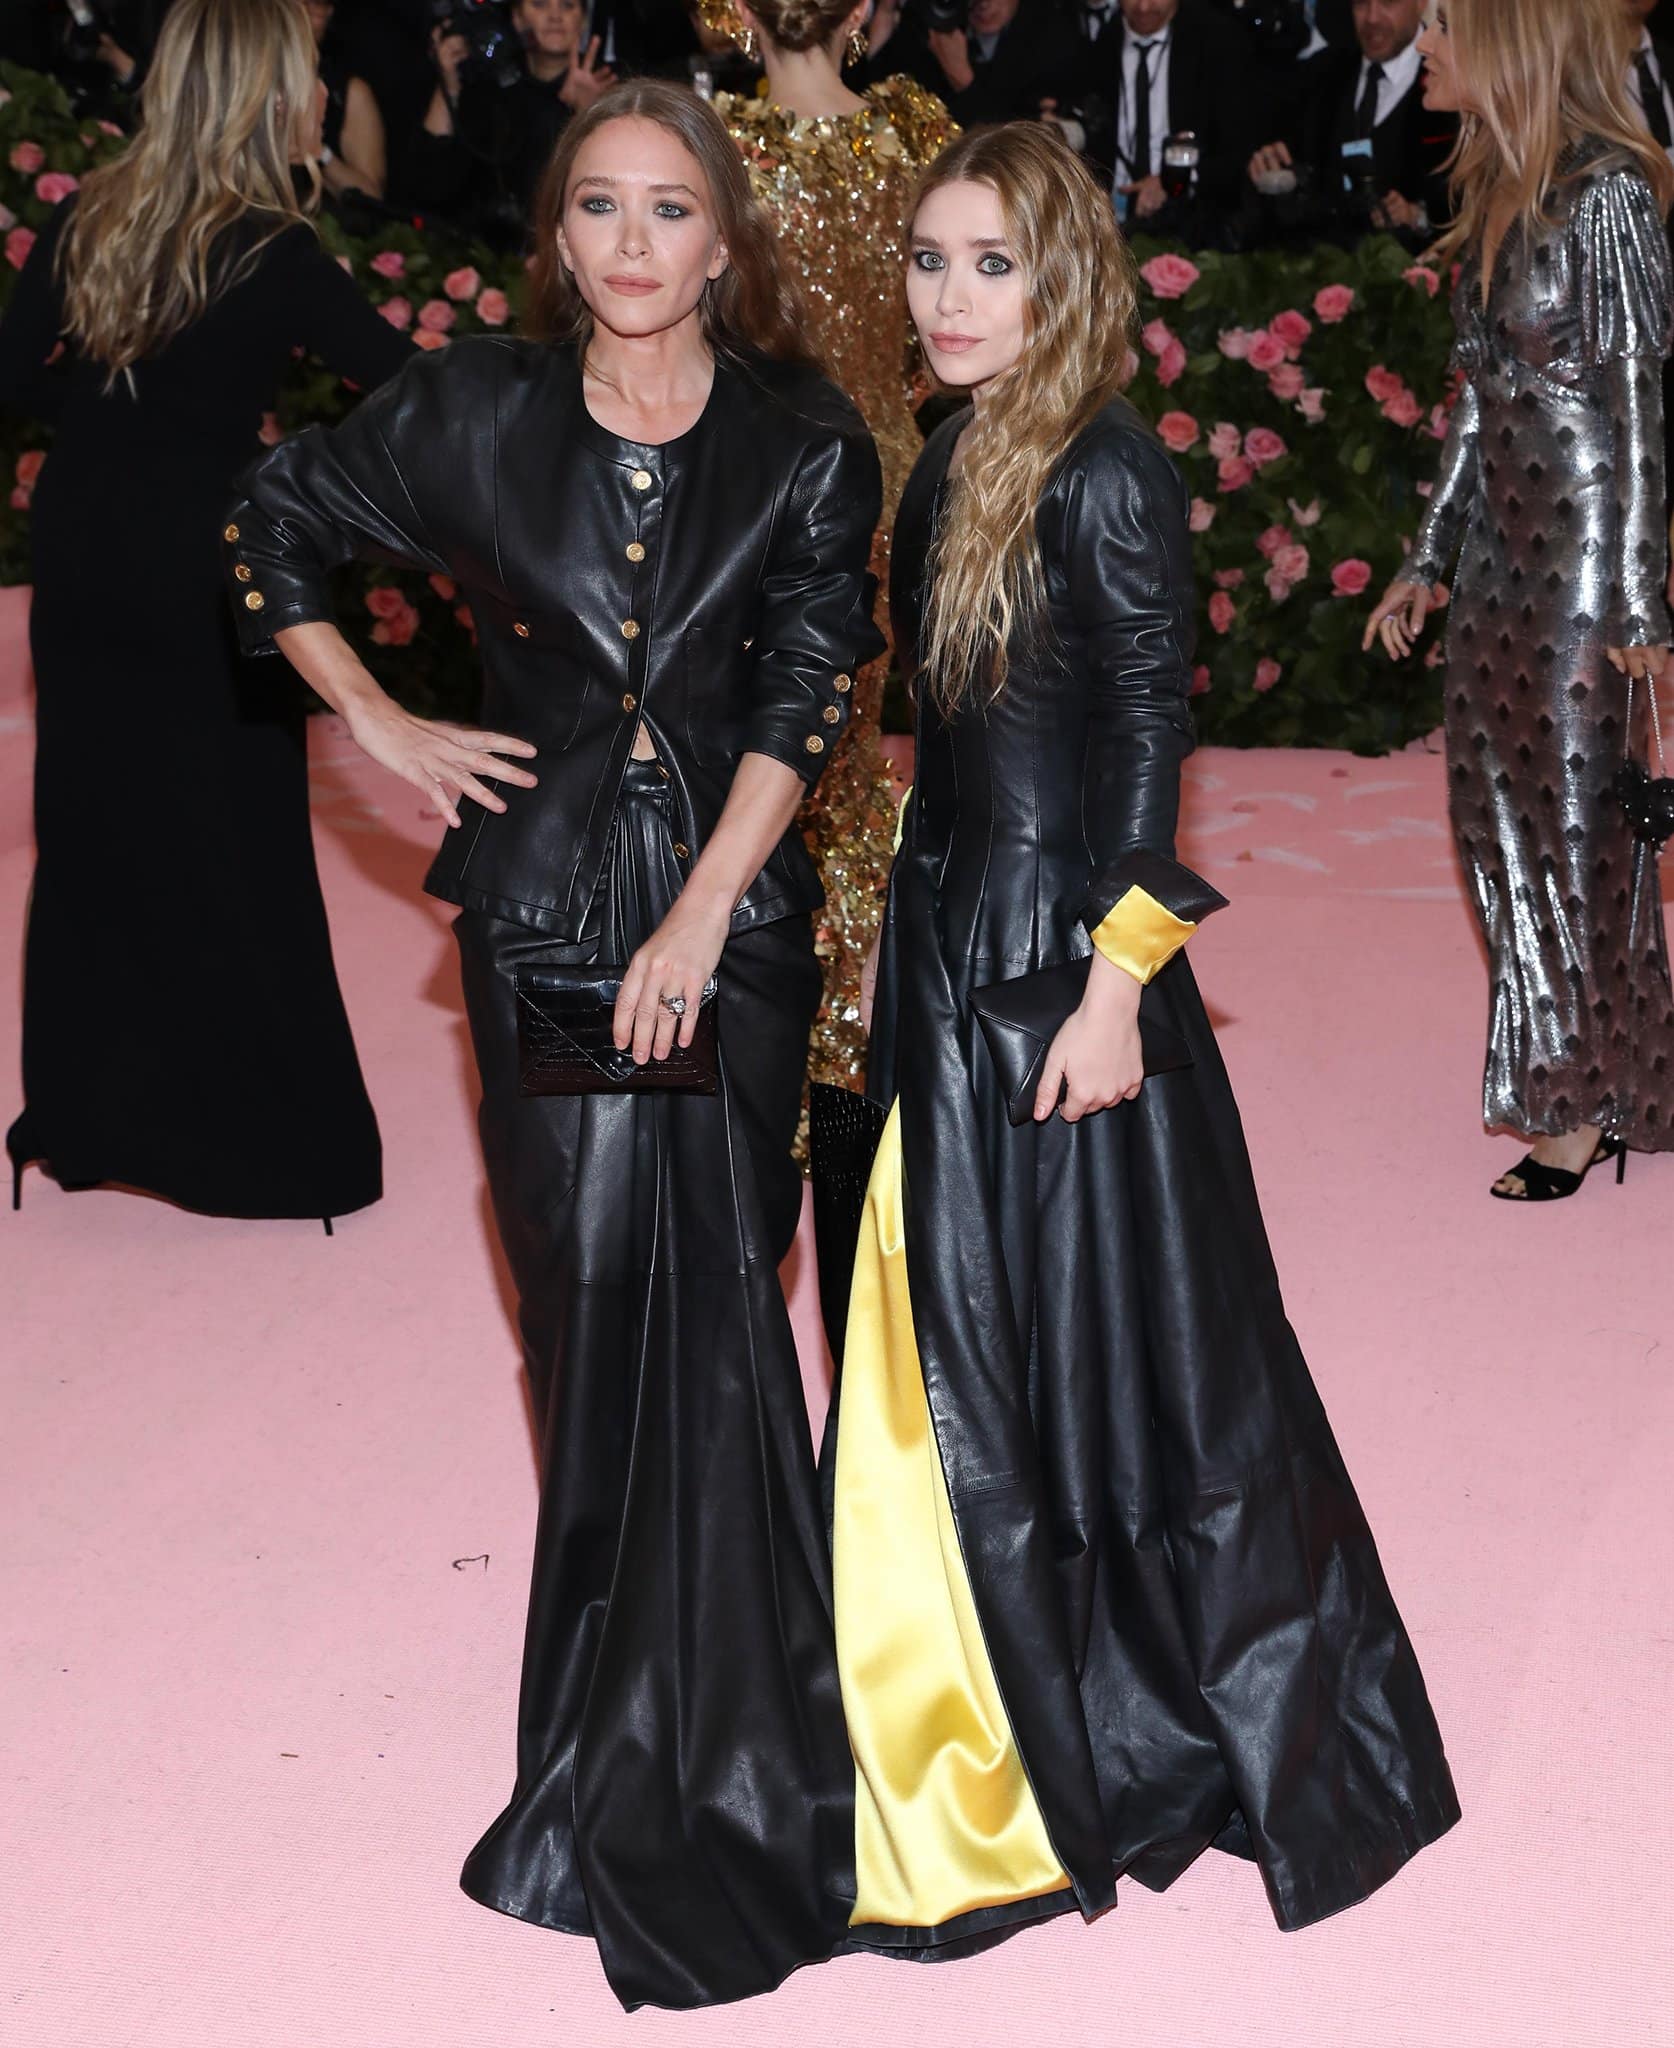 Mary-Kate and Ashley Olsen also own other fashion labels: Olsenboye, StyleMint, and Elizabeth and James